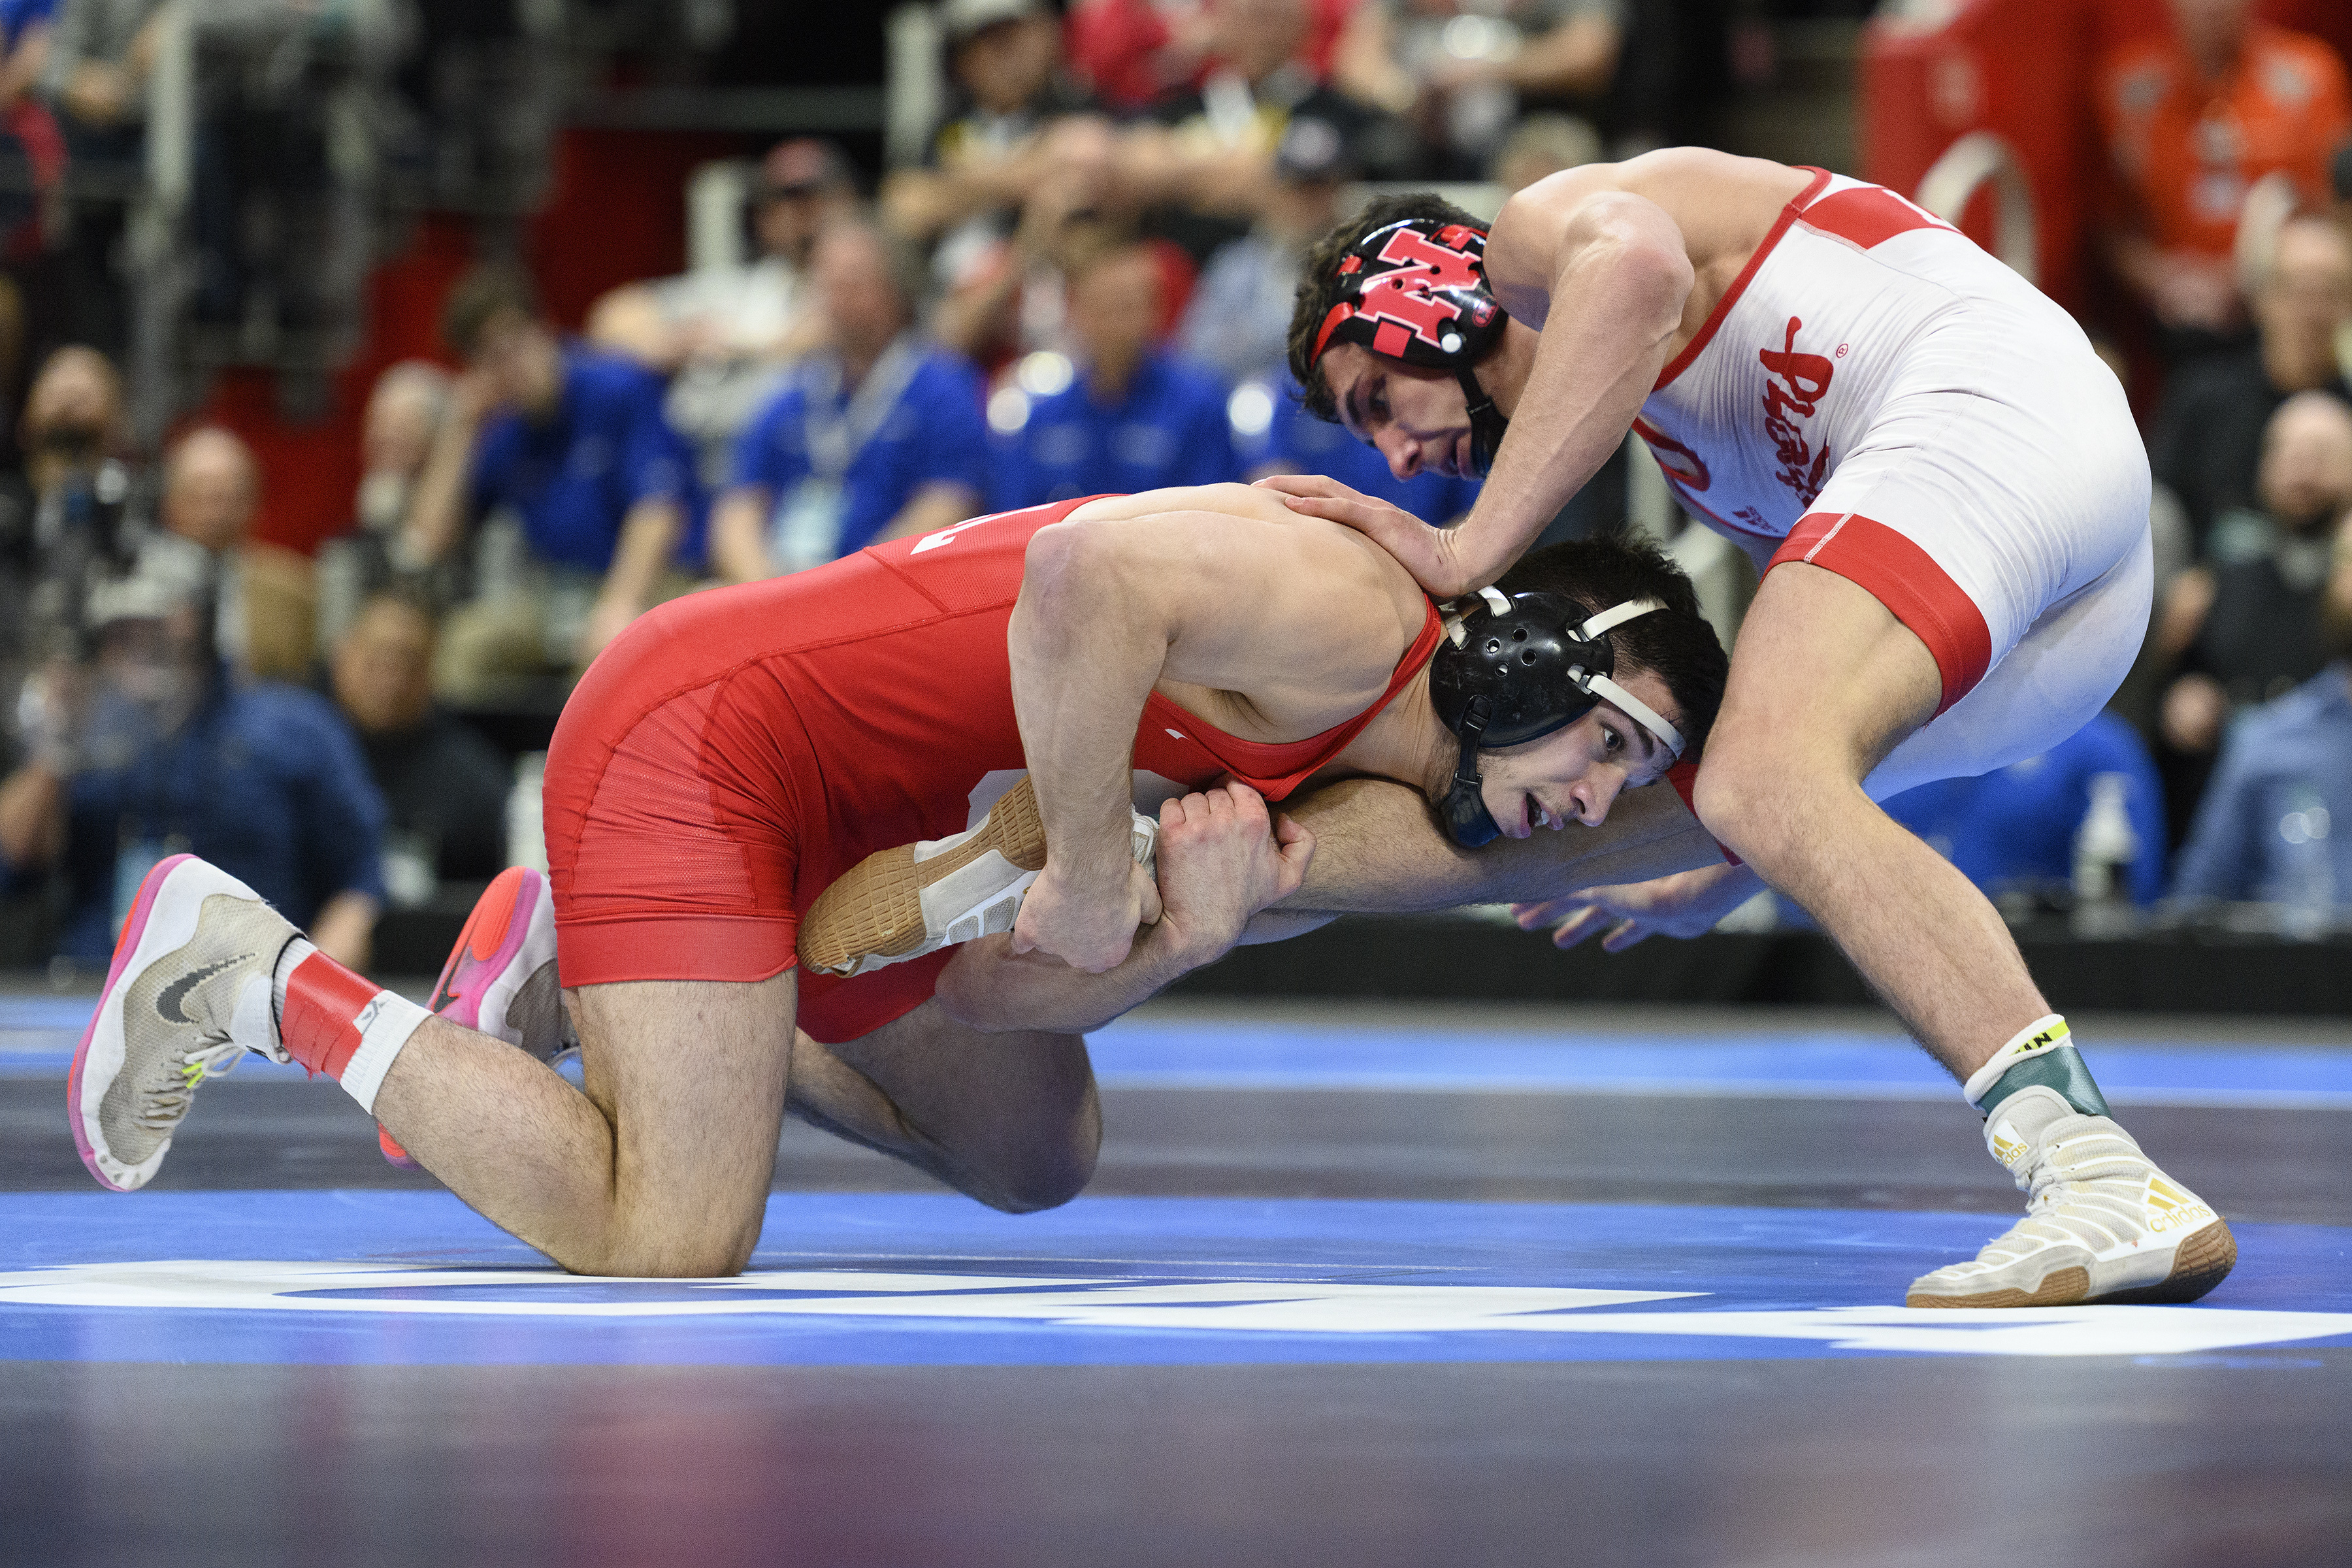 2023 NCAA Wrestling Championships TV schedule, how to watch, stream for free